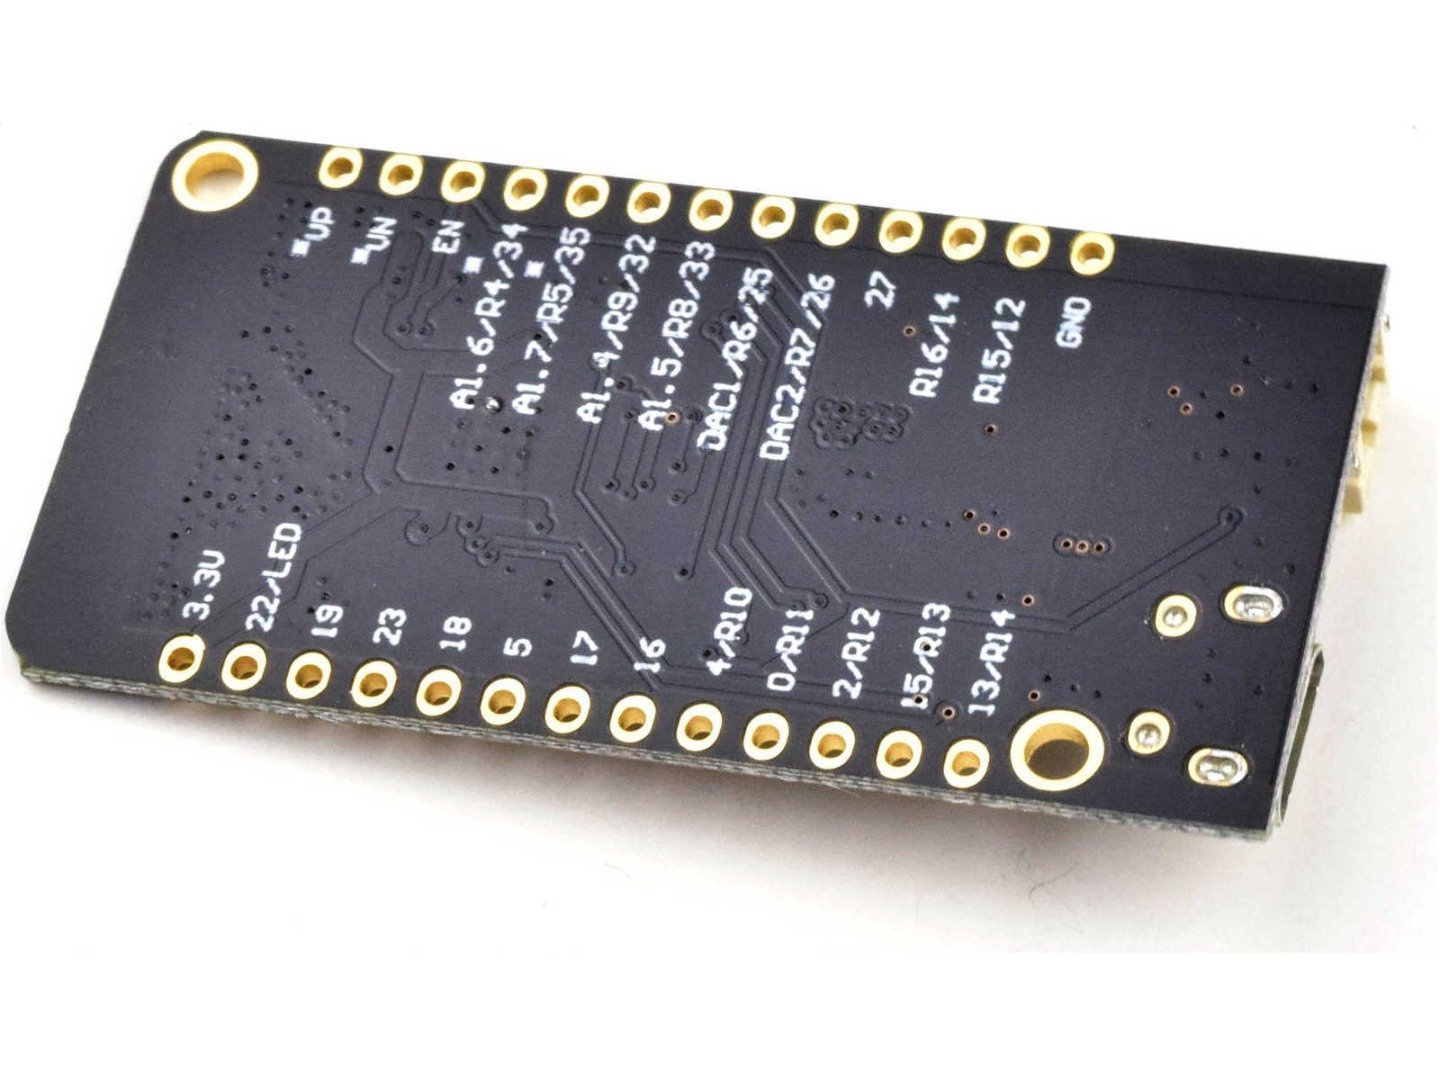 ESP32 LOLIN32 Lite MicroPython version with Battery Charger 10